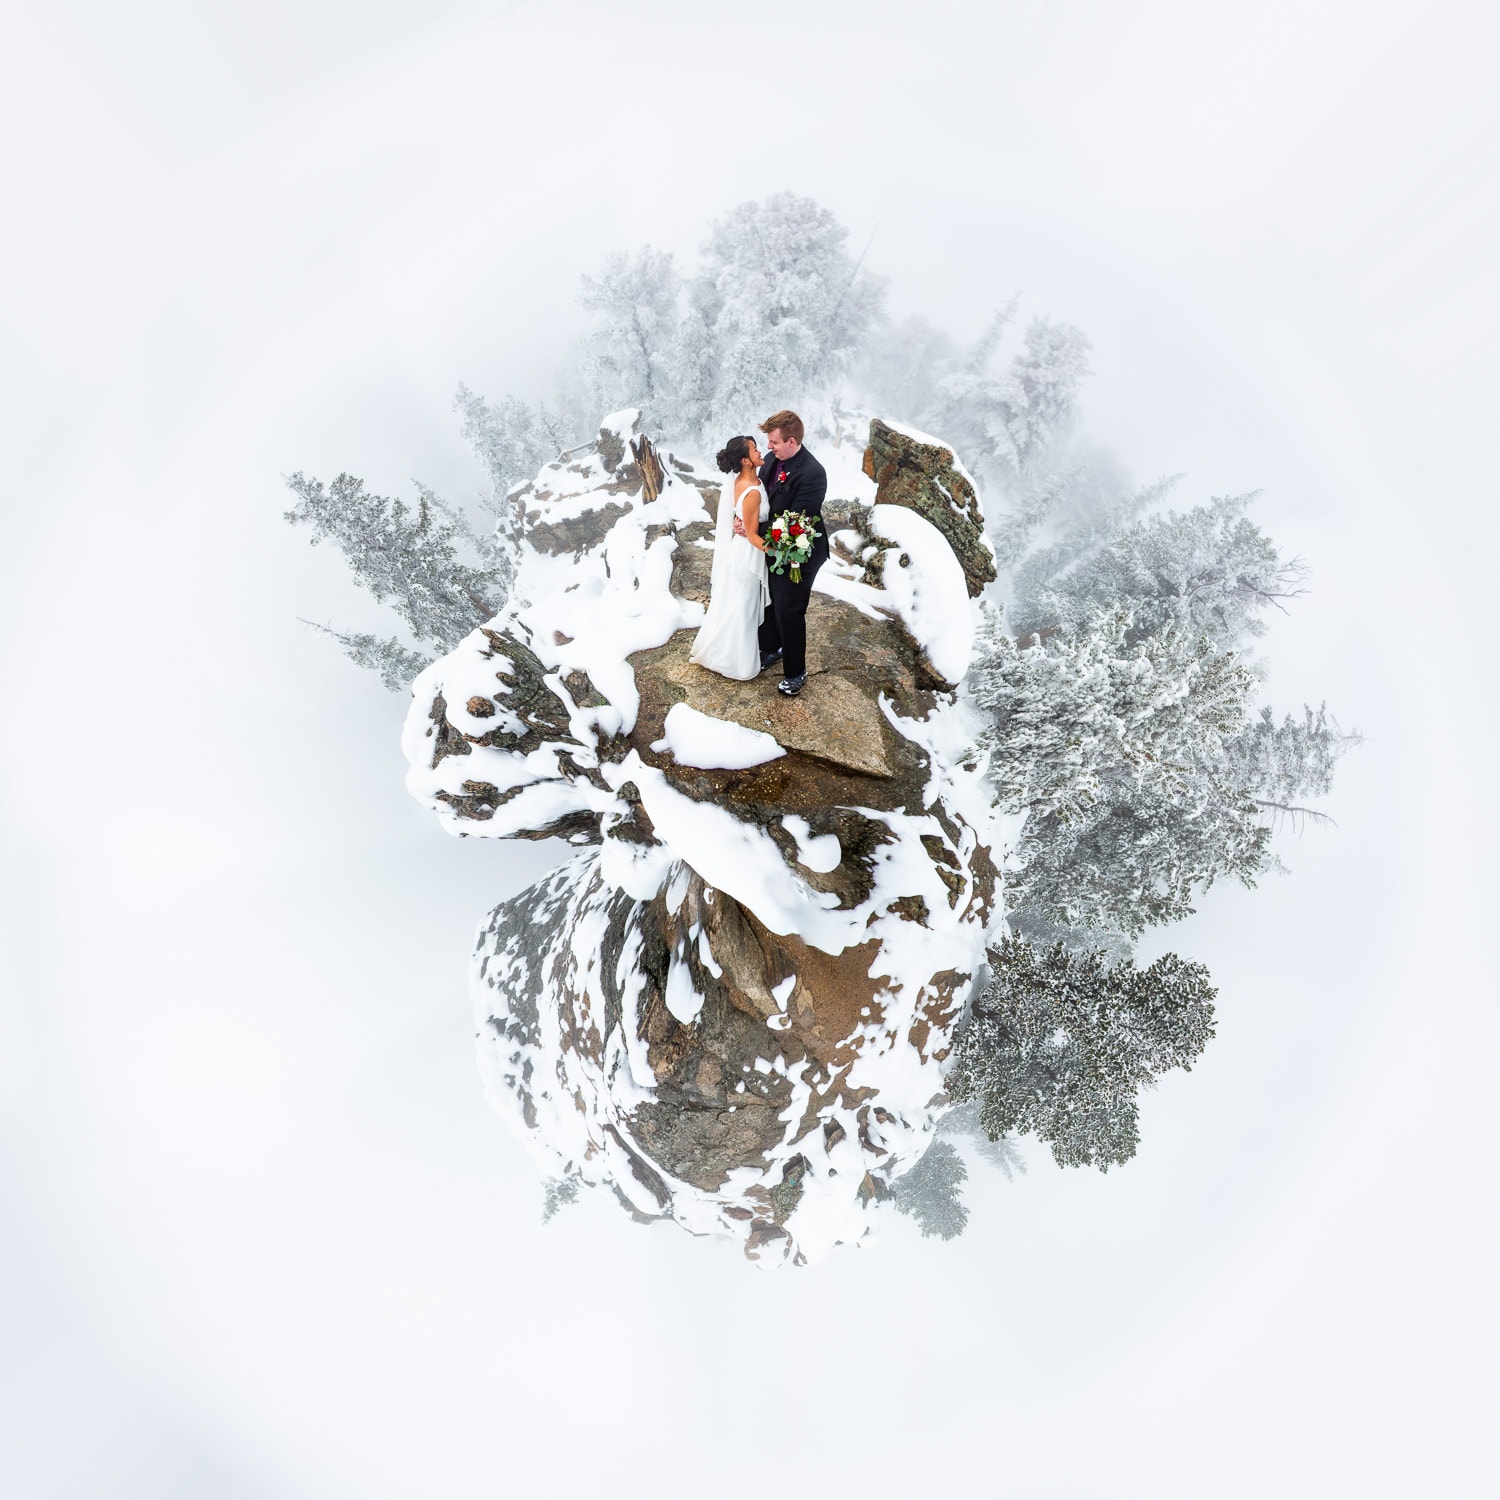 A tiny planet of a winter wedding couple in the mountains.